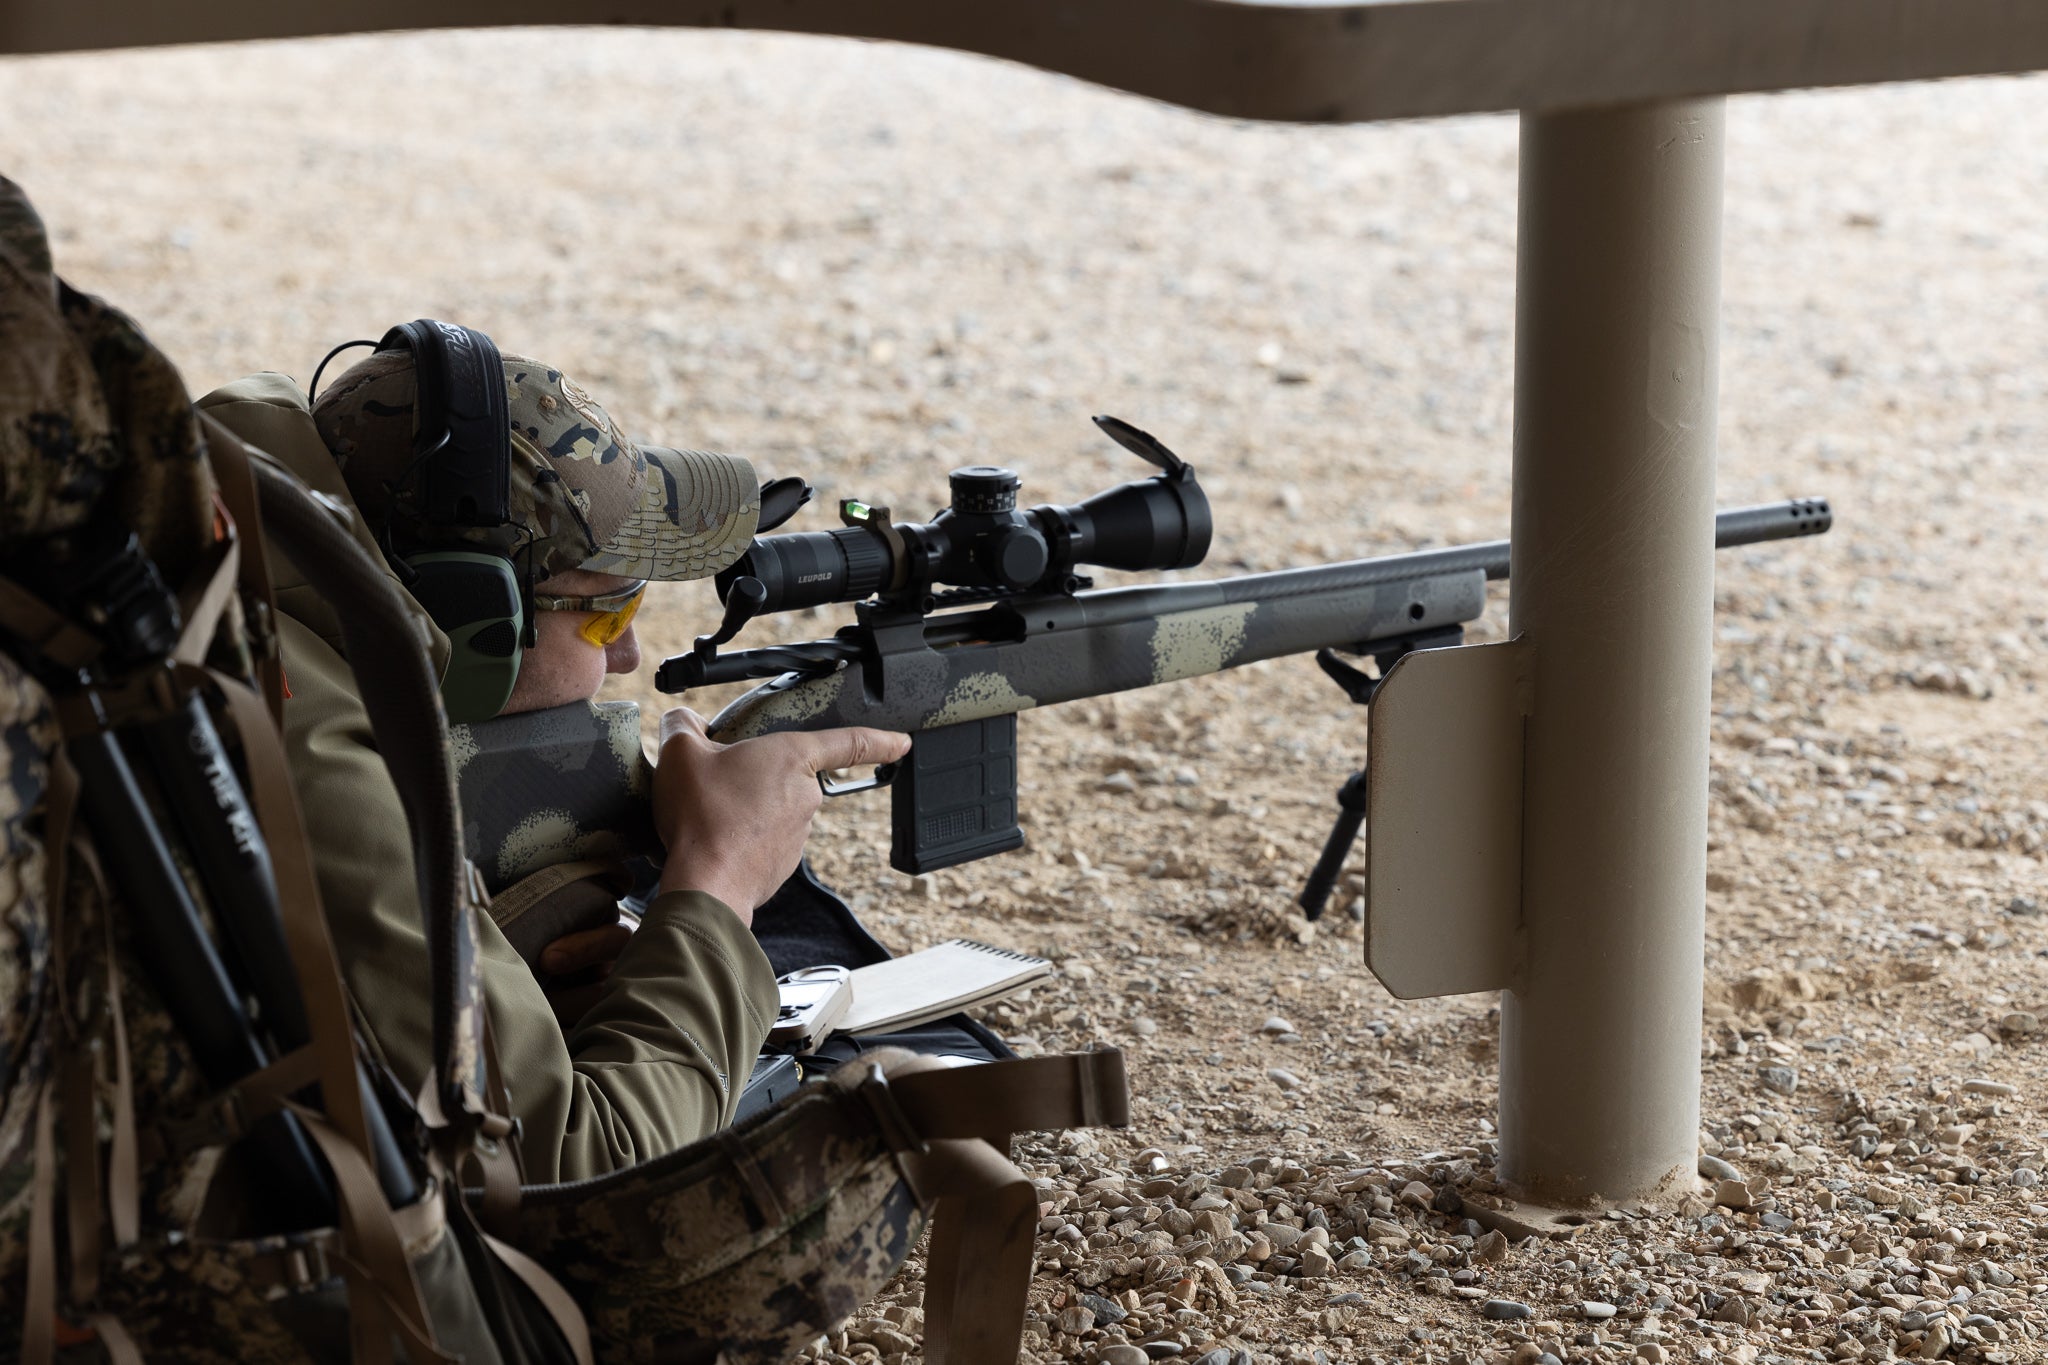 A man shooting a rifle in the prone position.